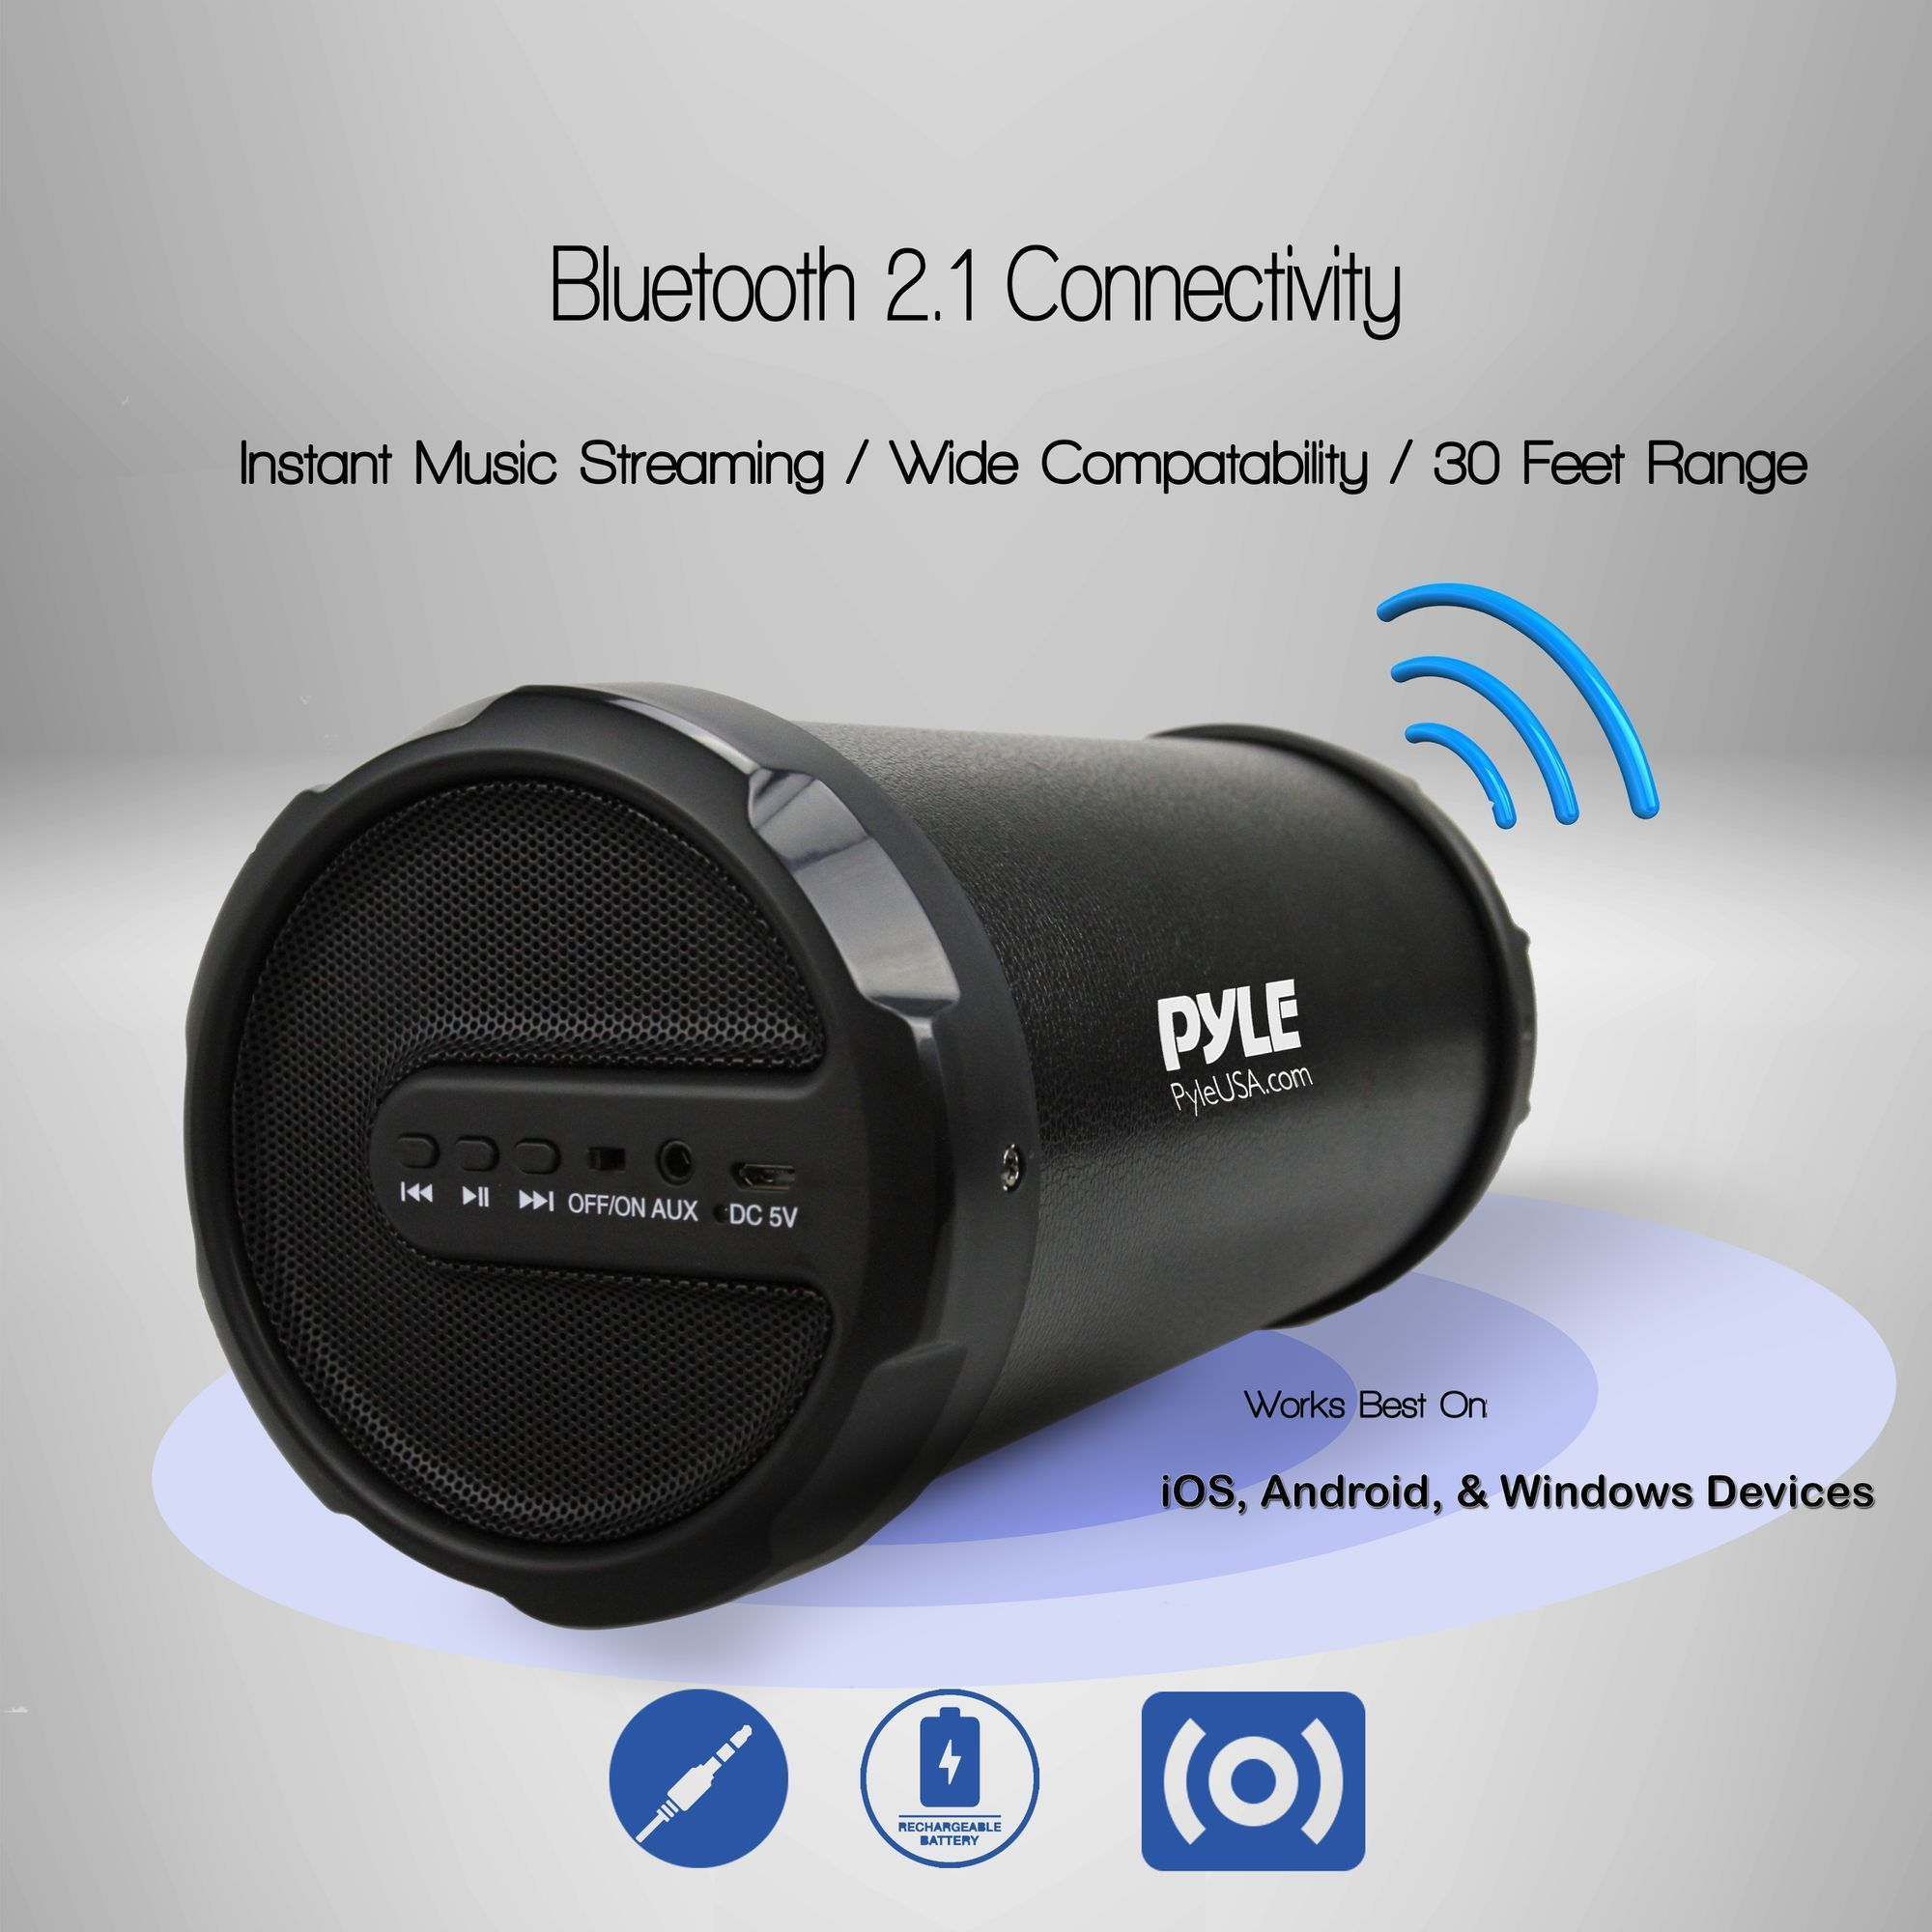 Pyle Portable Speaker, Boombox, Bluetooth Speakers, Rechargeable Battery, Surround Sound, Digital Sound Amplifier, 3.5mm Aux Input, 2.1 Channel Hi-Fi Active Stereo Speaker System in Black - PBMSPG11